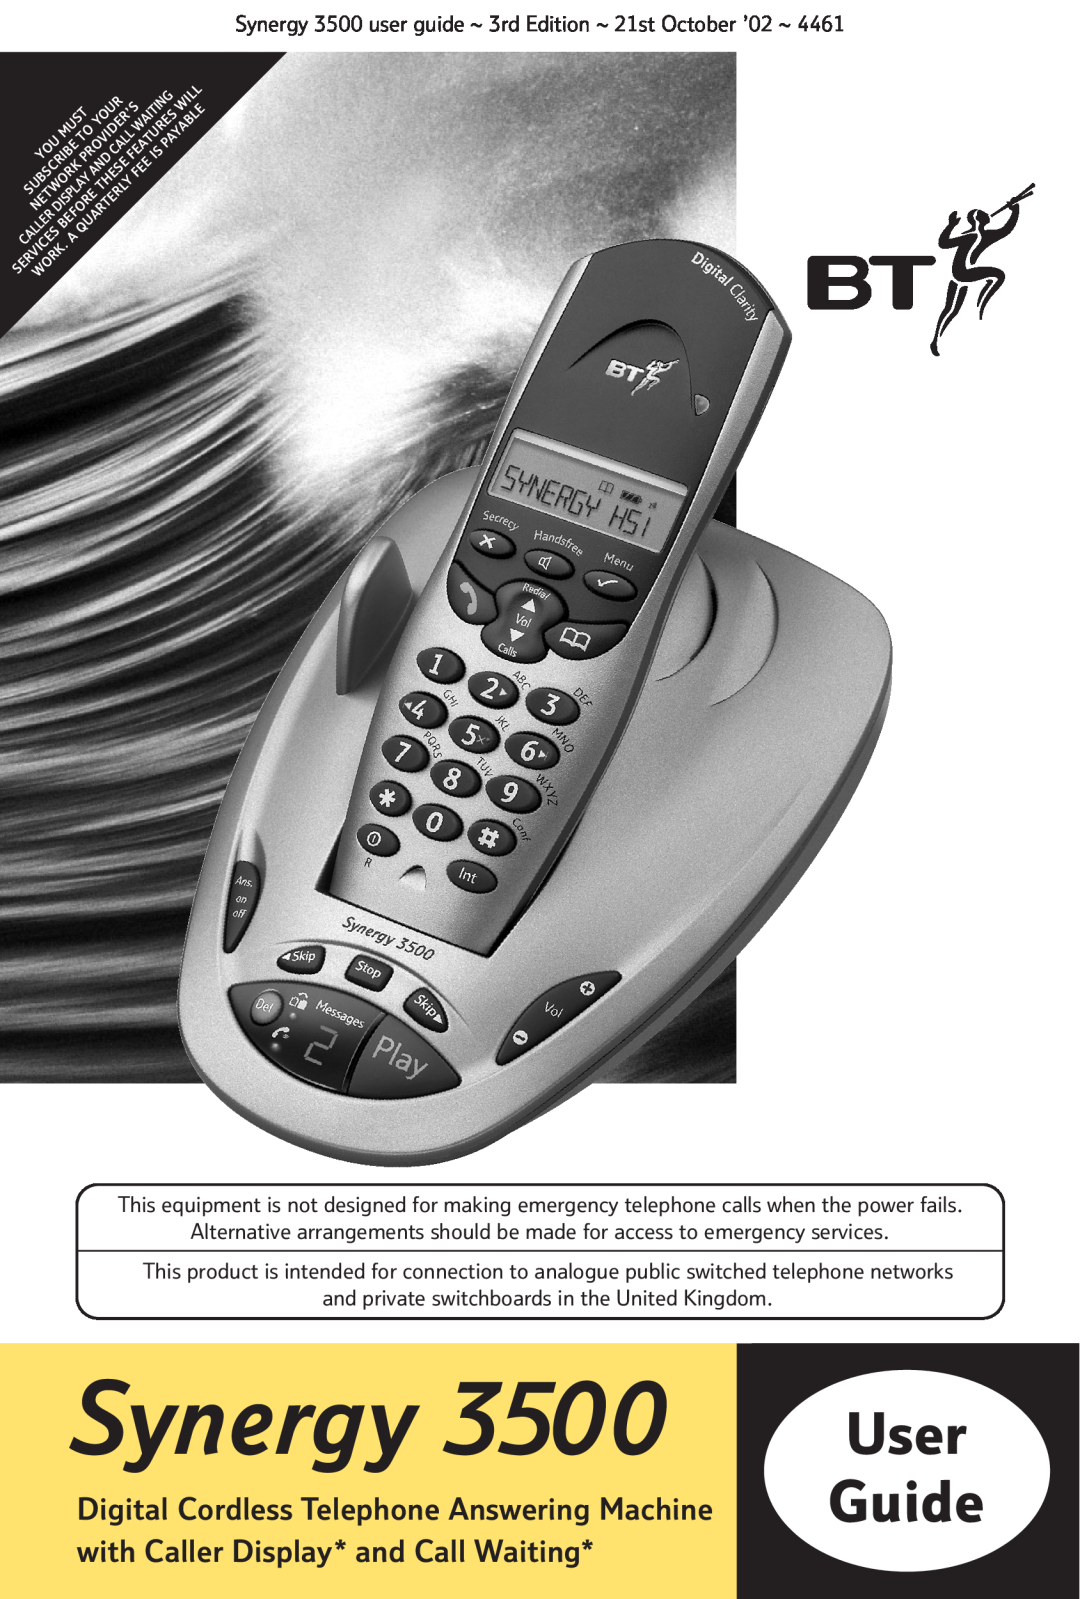 BT Synergy 3500 manual Digital Cordless Telephone Answering Machine, with Caller Display* and Call Waiting 